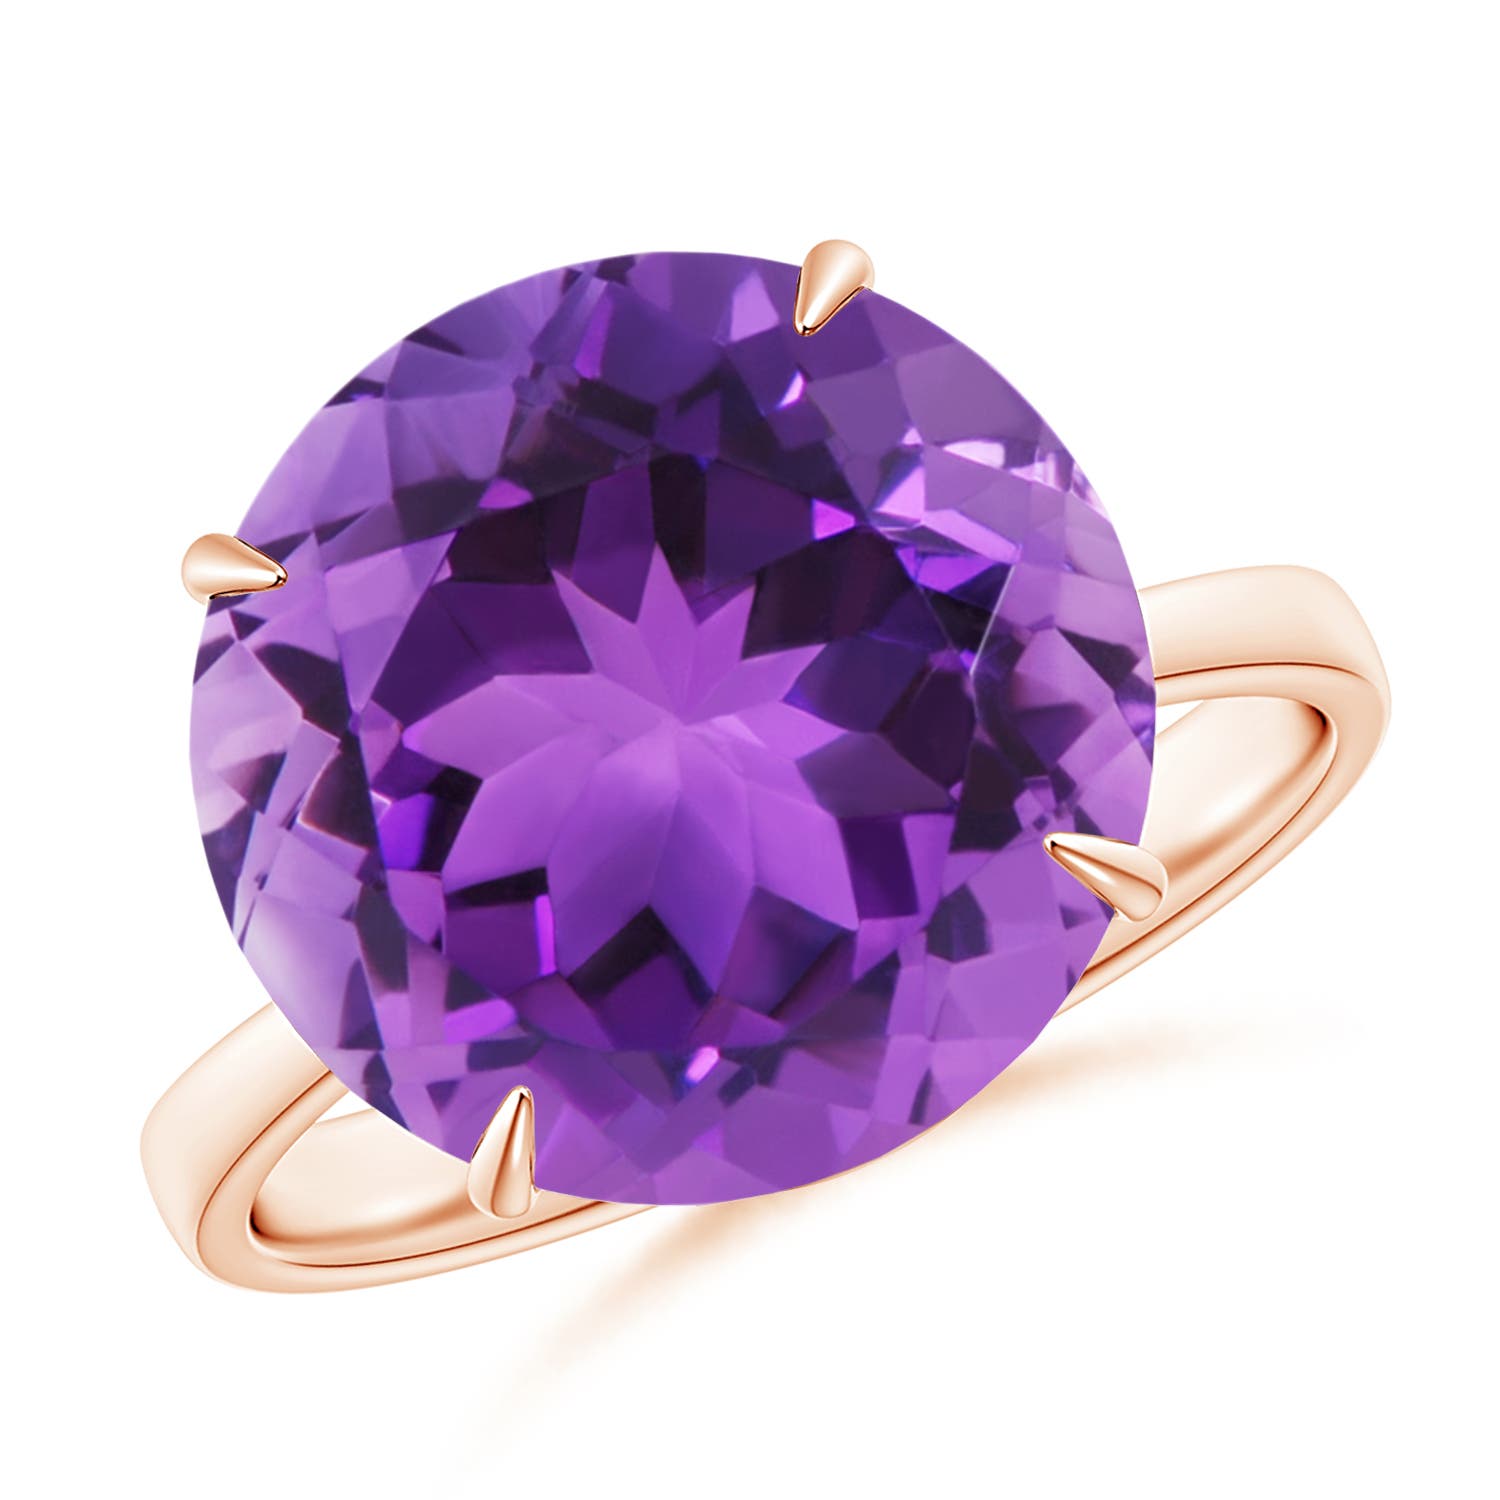 AAA - Amethyst / 7.2 CT / 14 KT Rose Gold